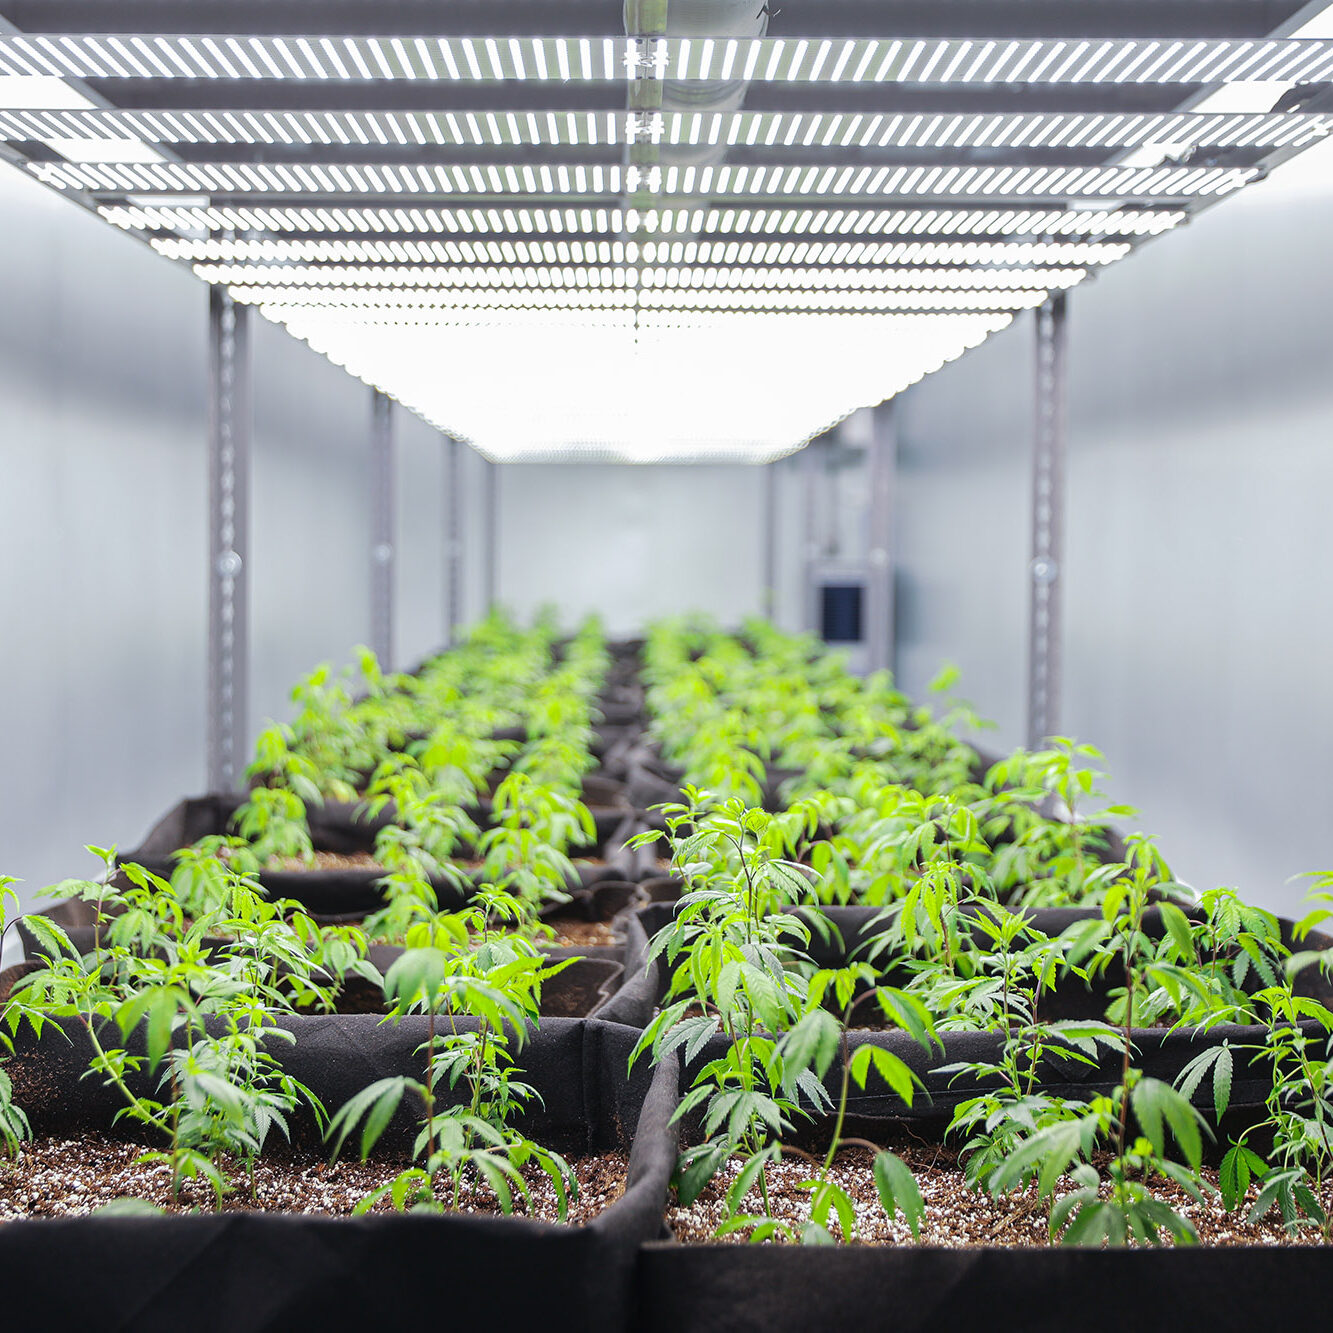 https://www.microlabfarms.com/wp-content/uploads/bb-plugin/cache/grow-cannabis-in-shipping-container-farms-micro-lab-farms-square.jpg